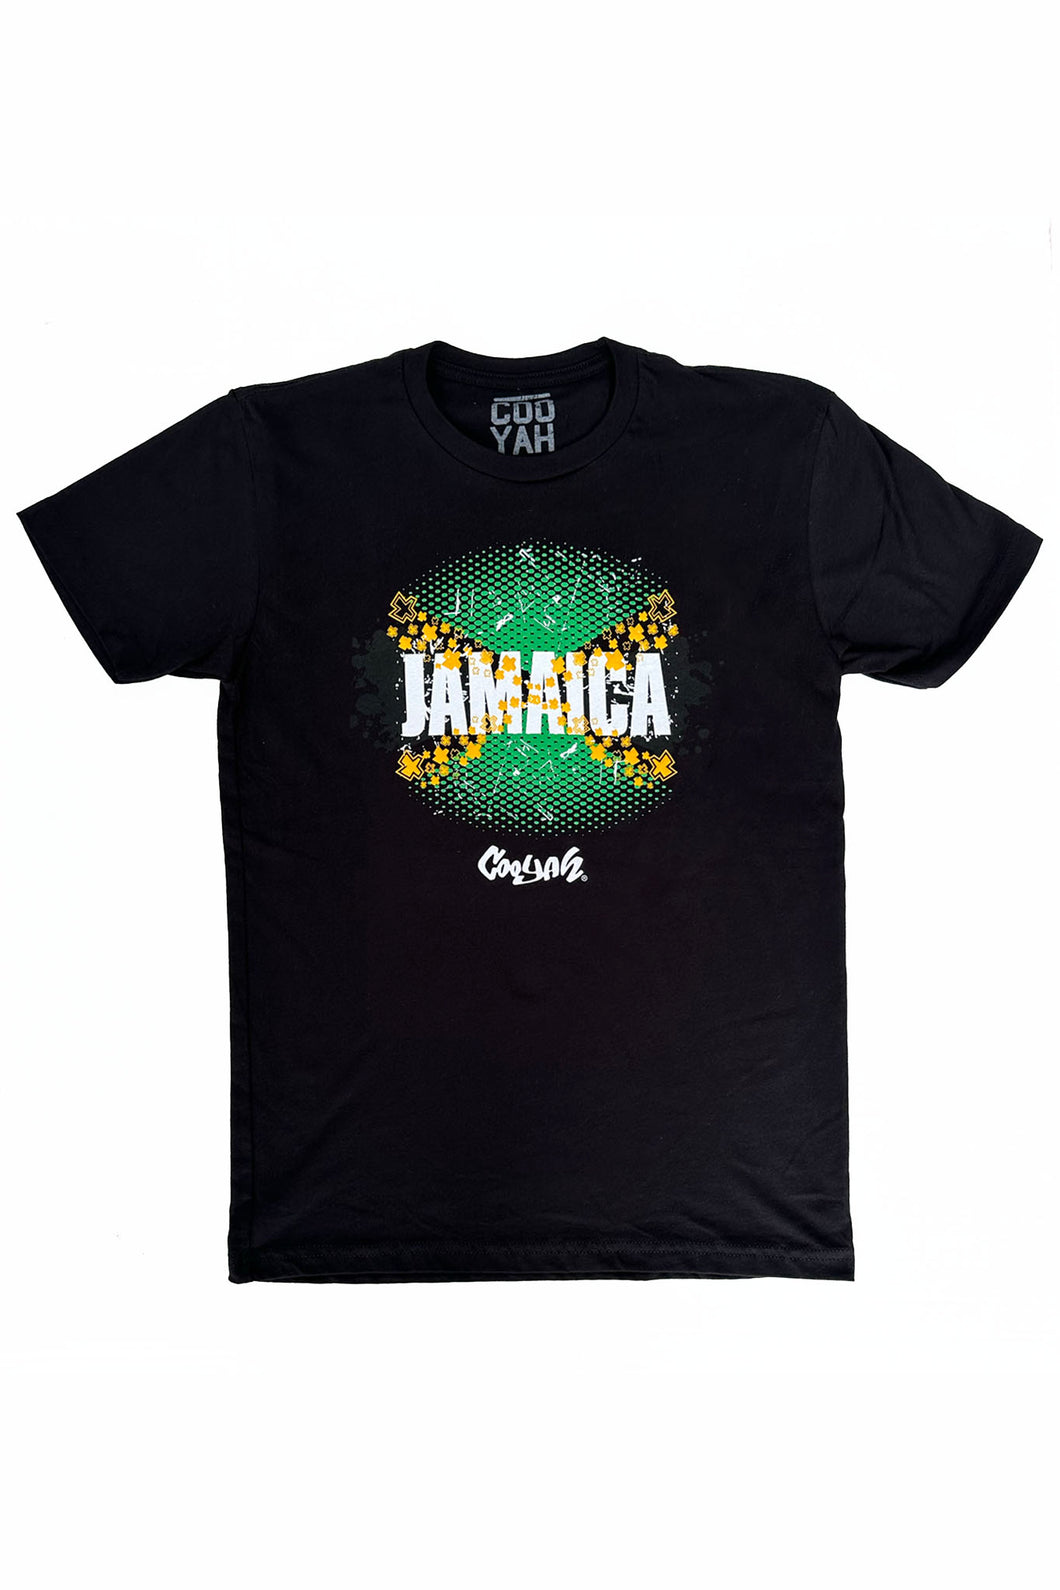 Cooyah Jamaica graphic tee in black.  Jamaican flag design on a short sleeve black graphic tee.